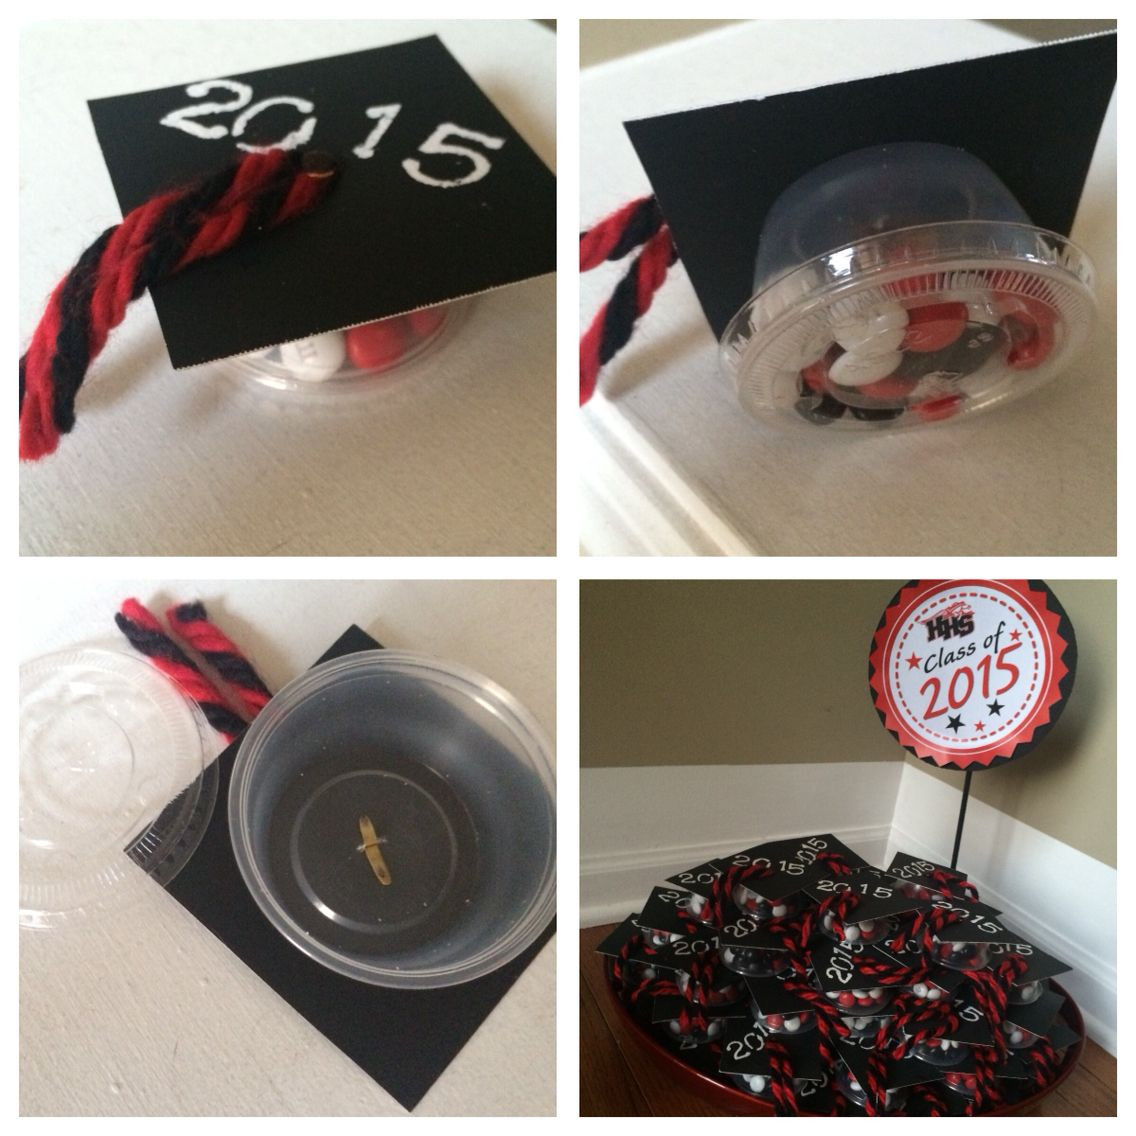 College Graduation Party Favor Ideas
 Graduation Party Favors I made these using 3"x3" black